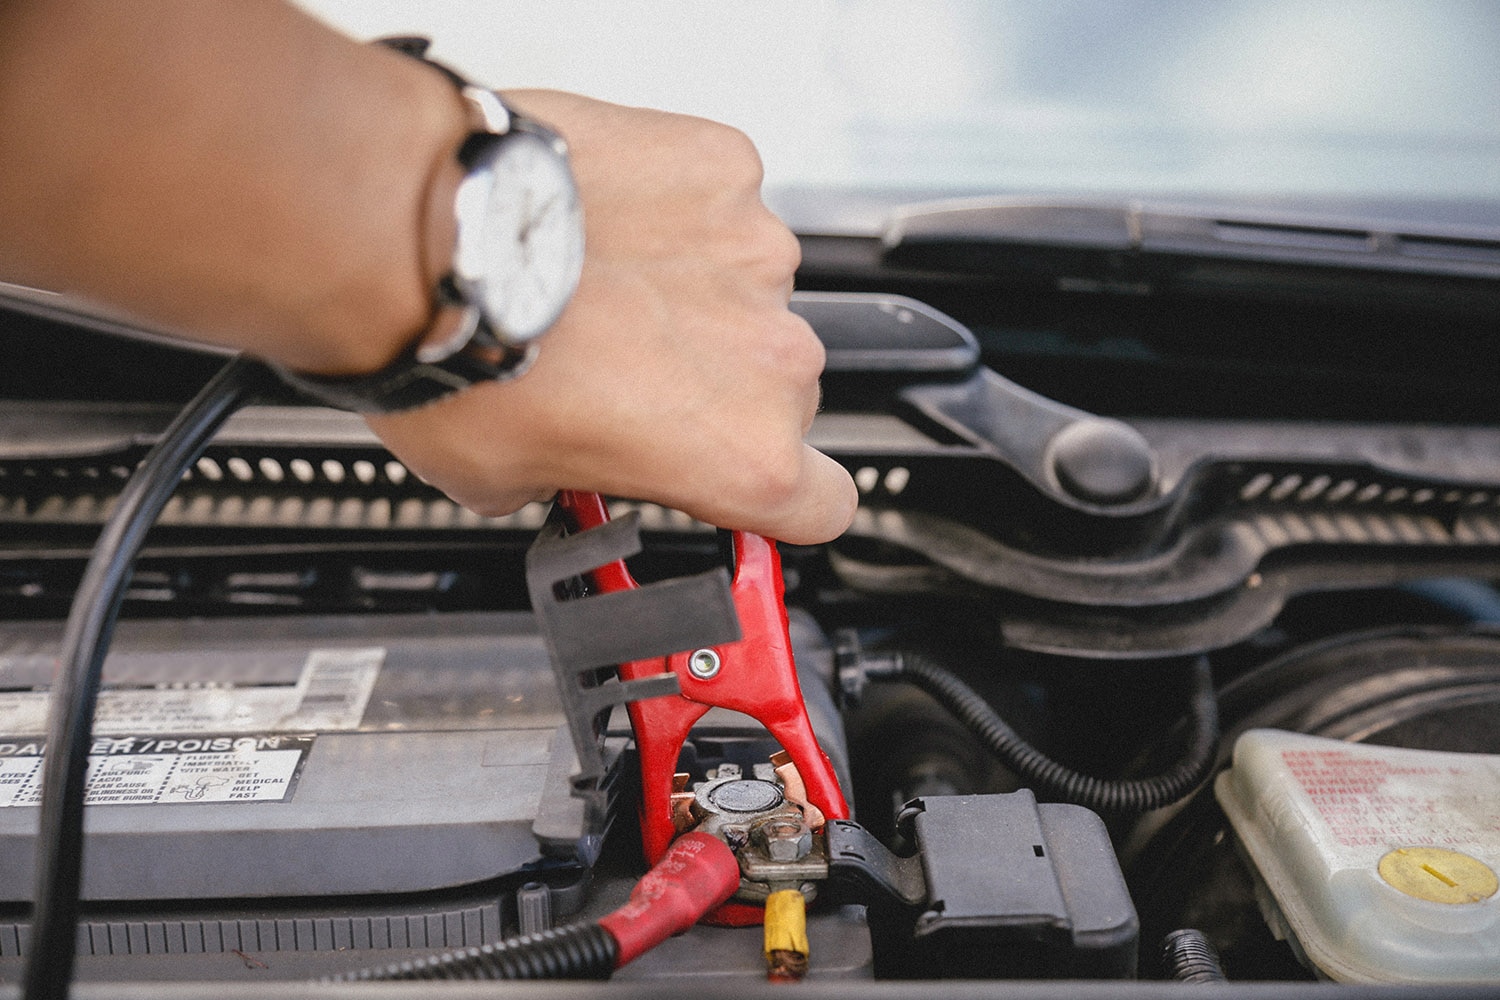 A person's hand attaches a jumper cable to a battery terminal